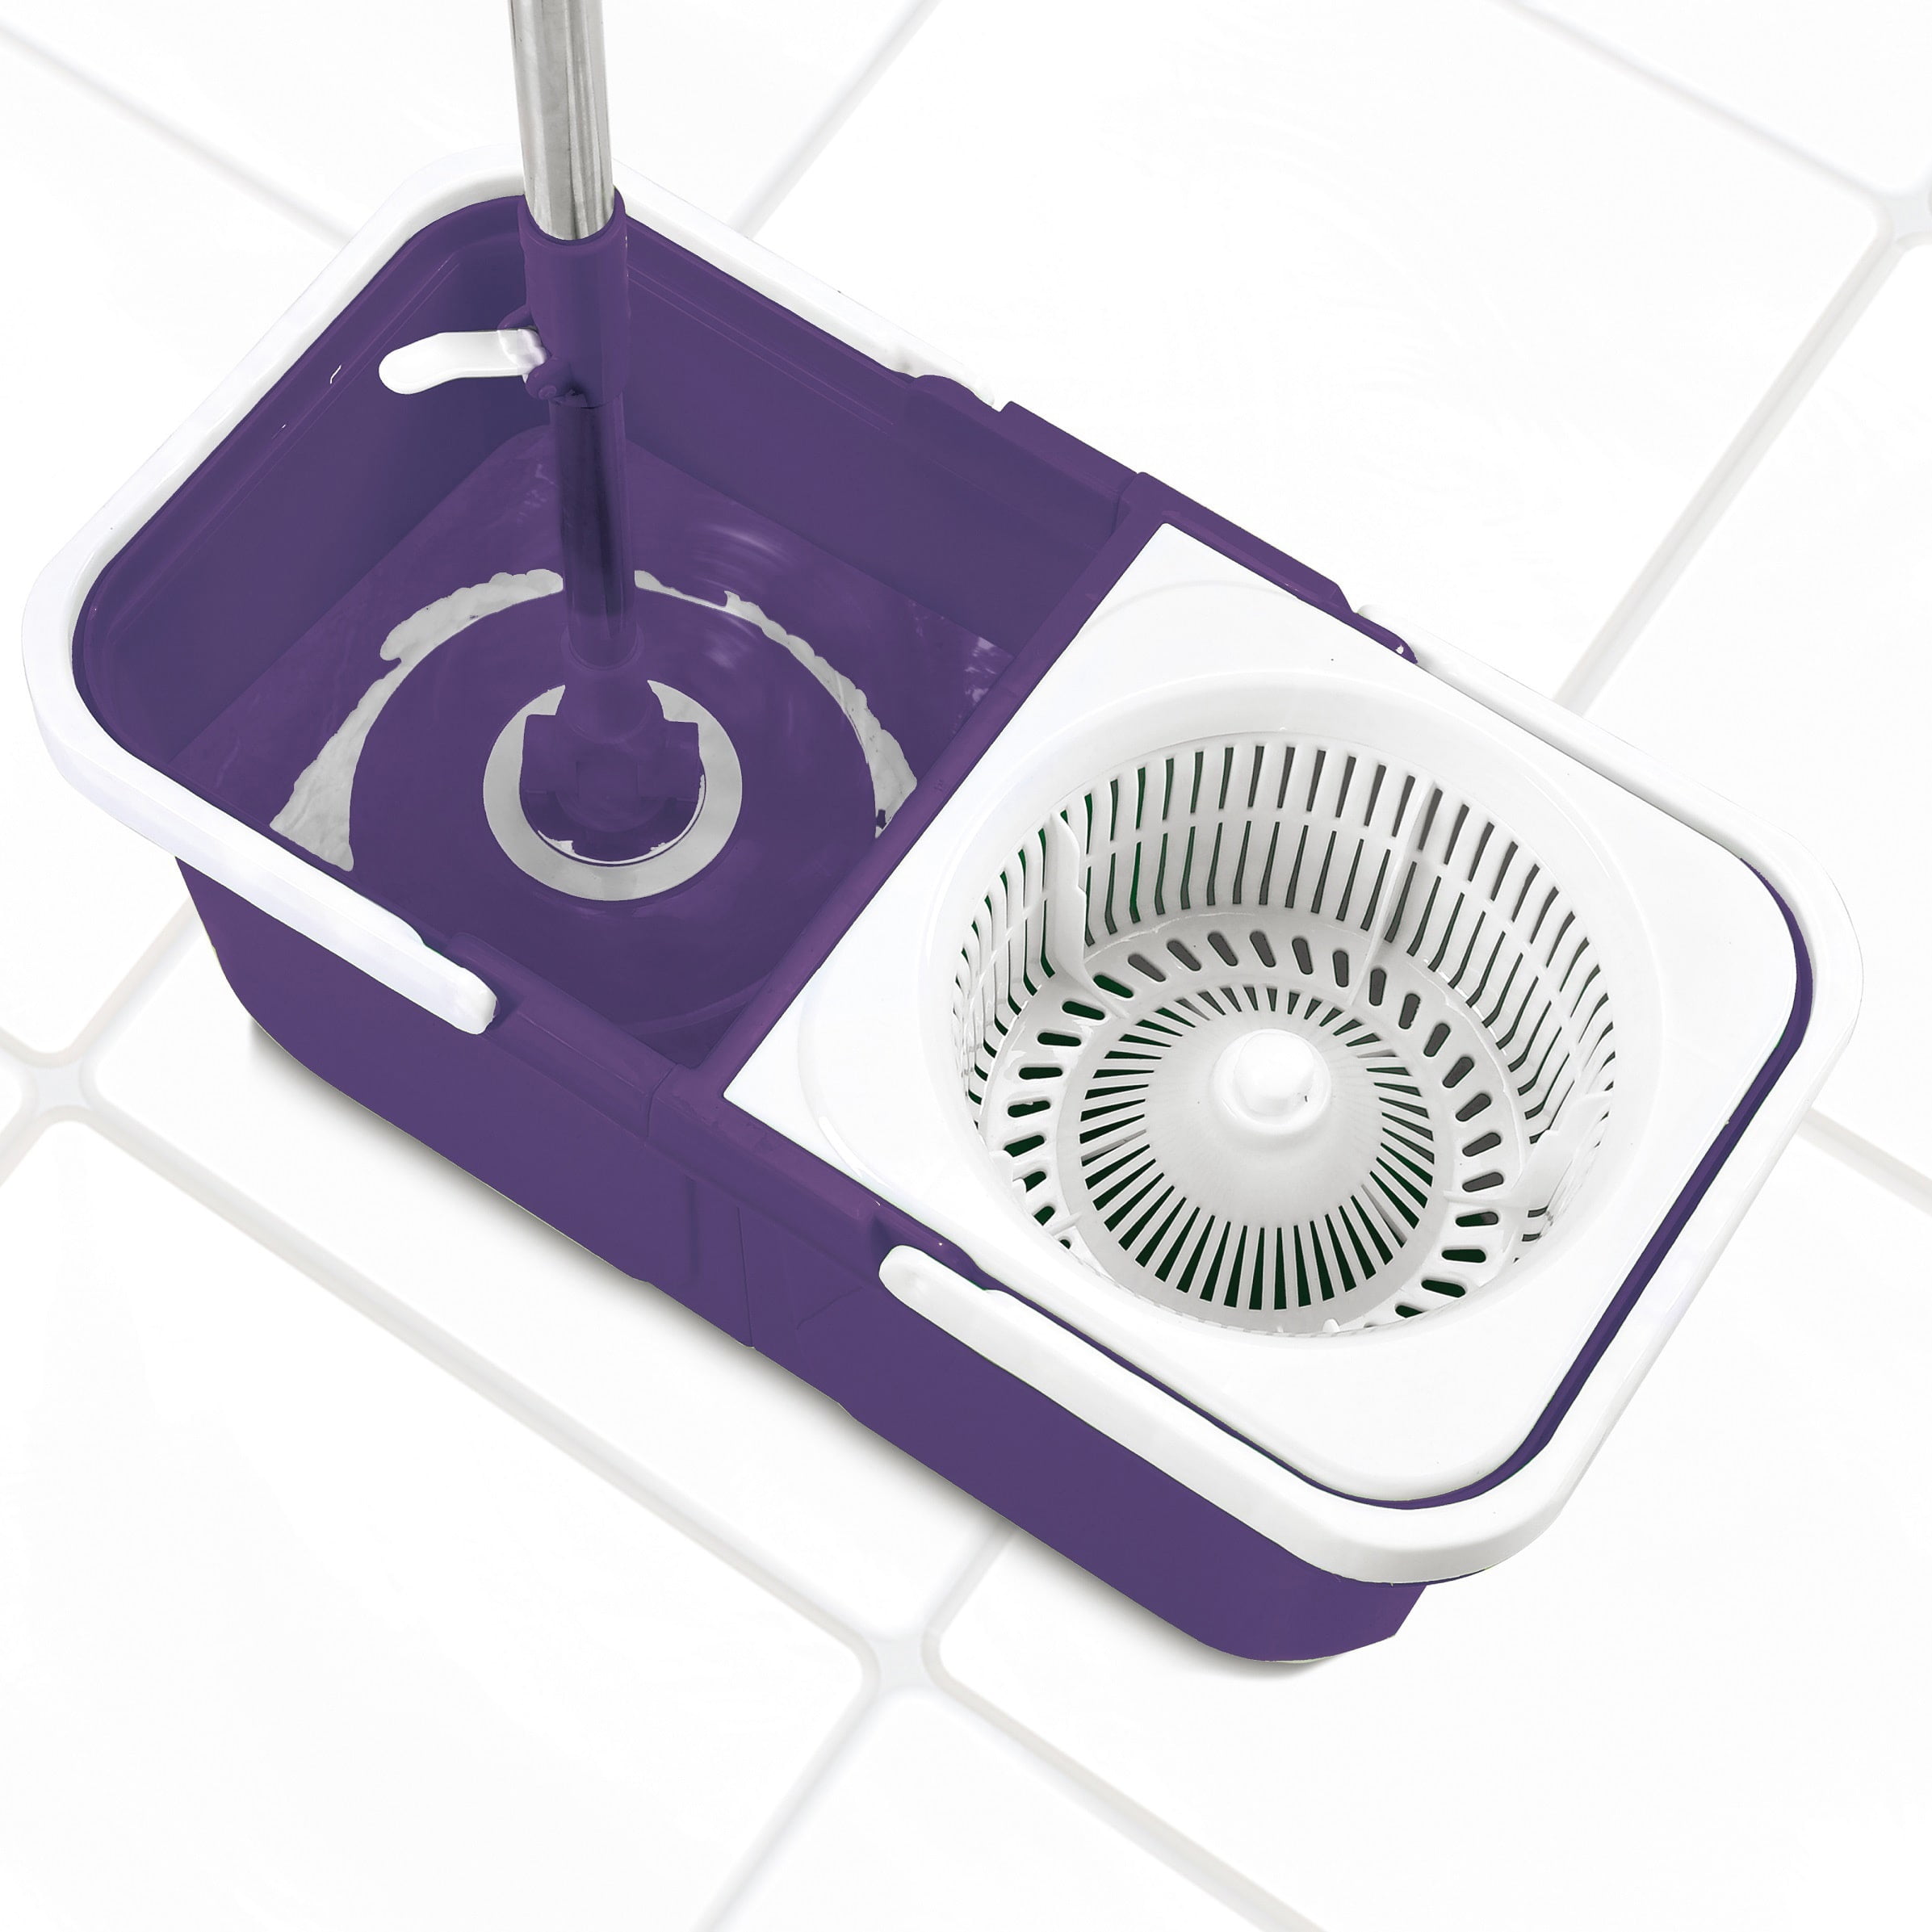 Insta Mop Spin Mop and Bucket Set